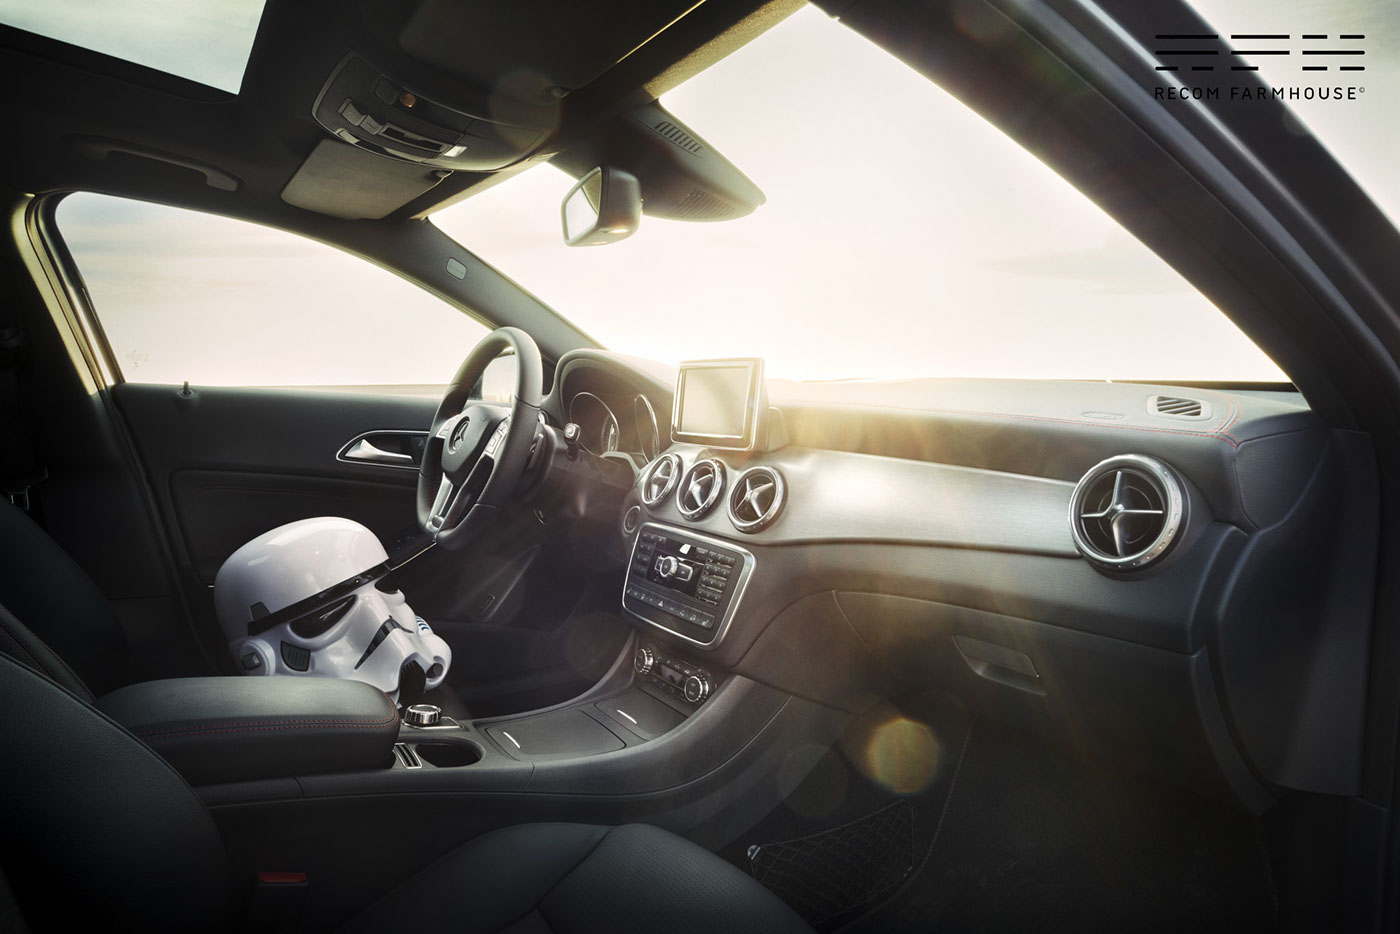 automotive   star wars maytheforcebewithyou May4th stormtrooper Scifi Starwars